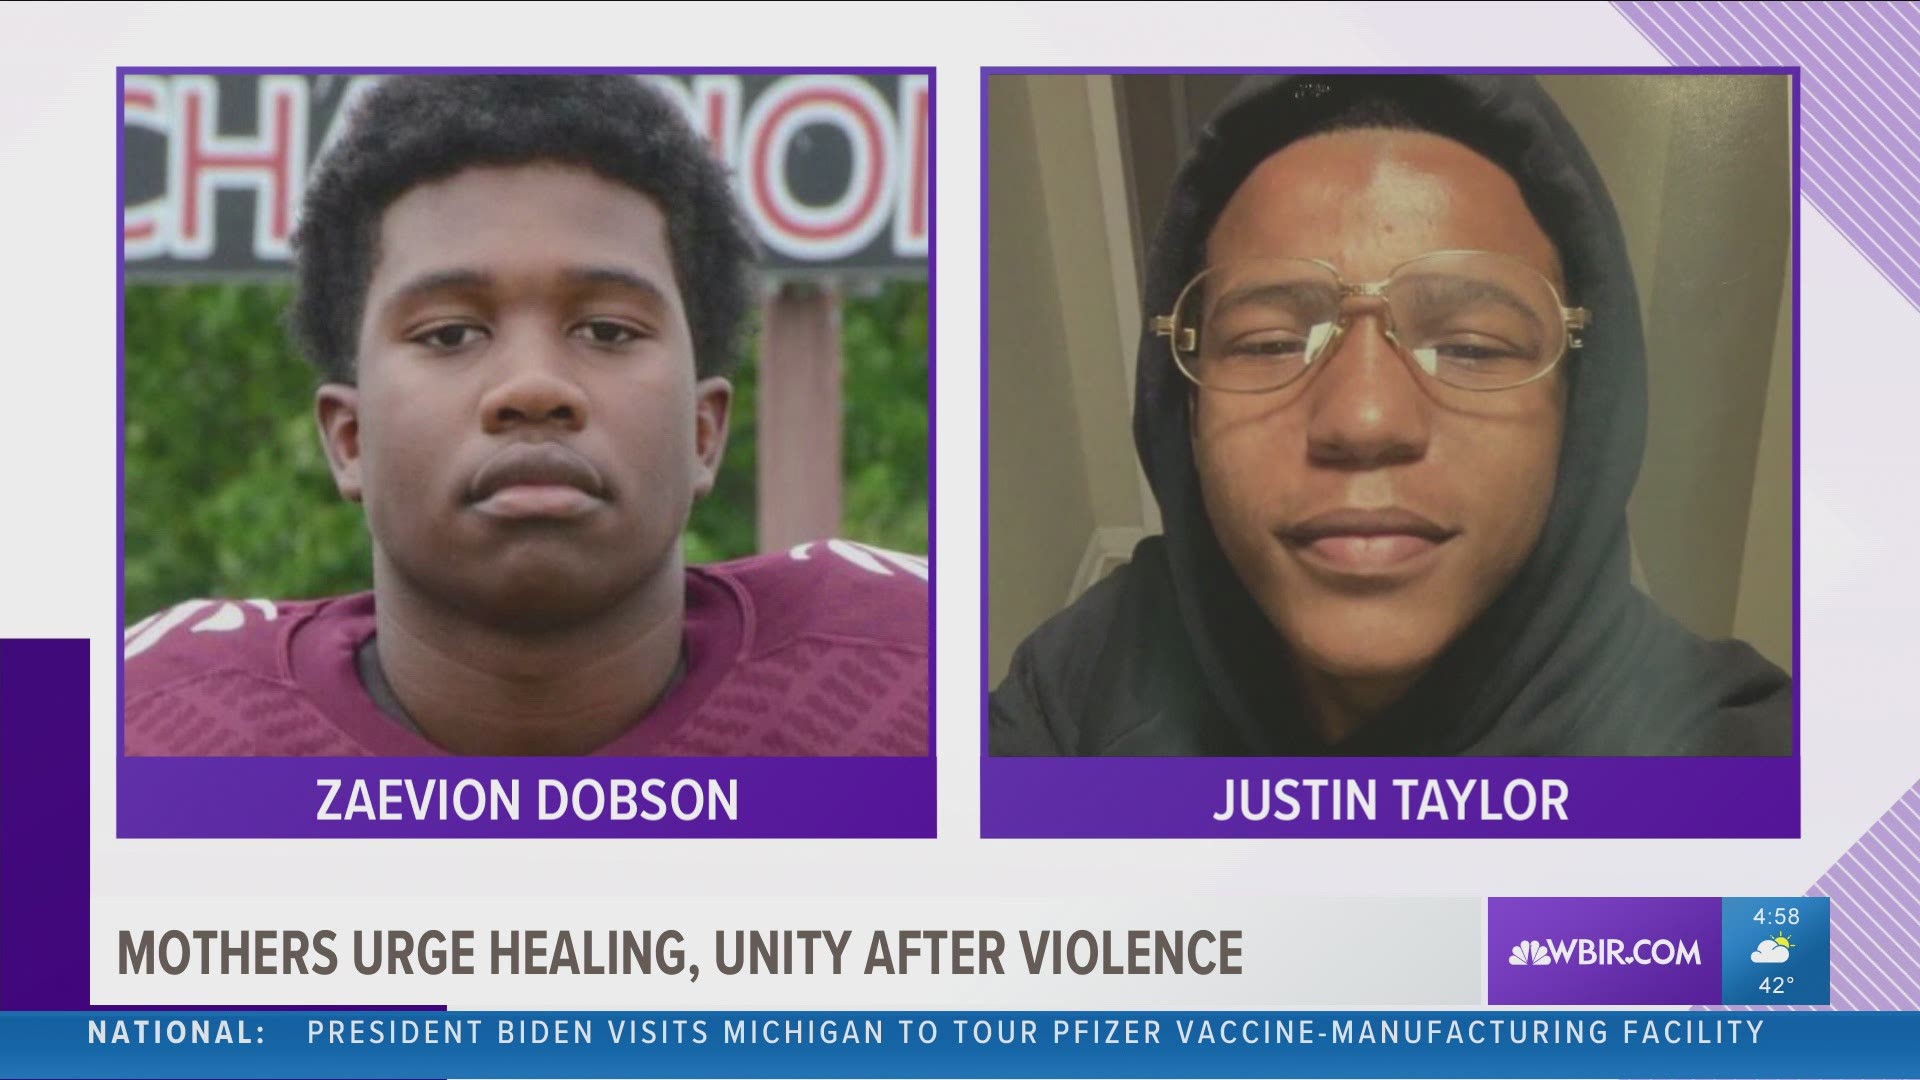 Zenobia Dobson and Stephanie Taylor lost their sons to gun violence. Their message: The violence must stop.